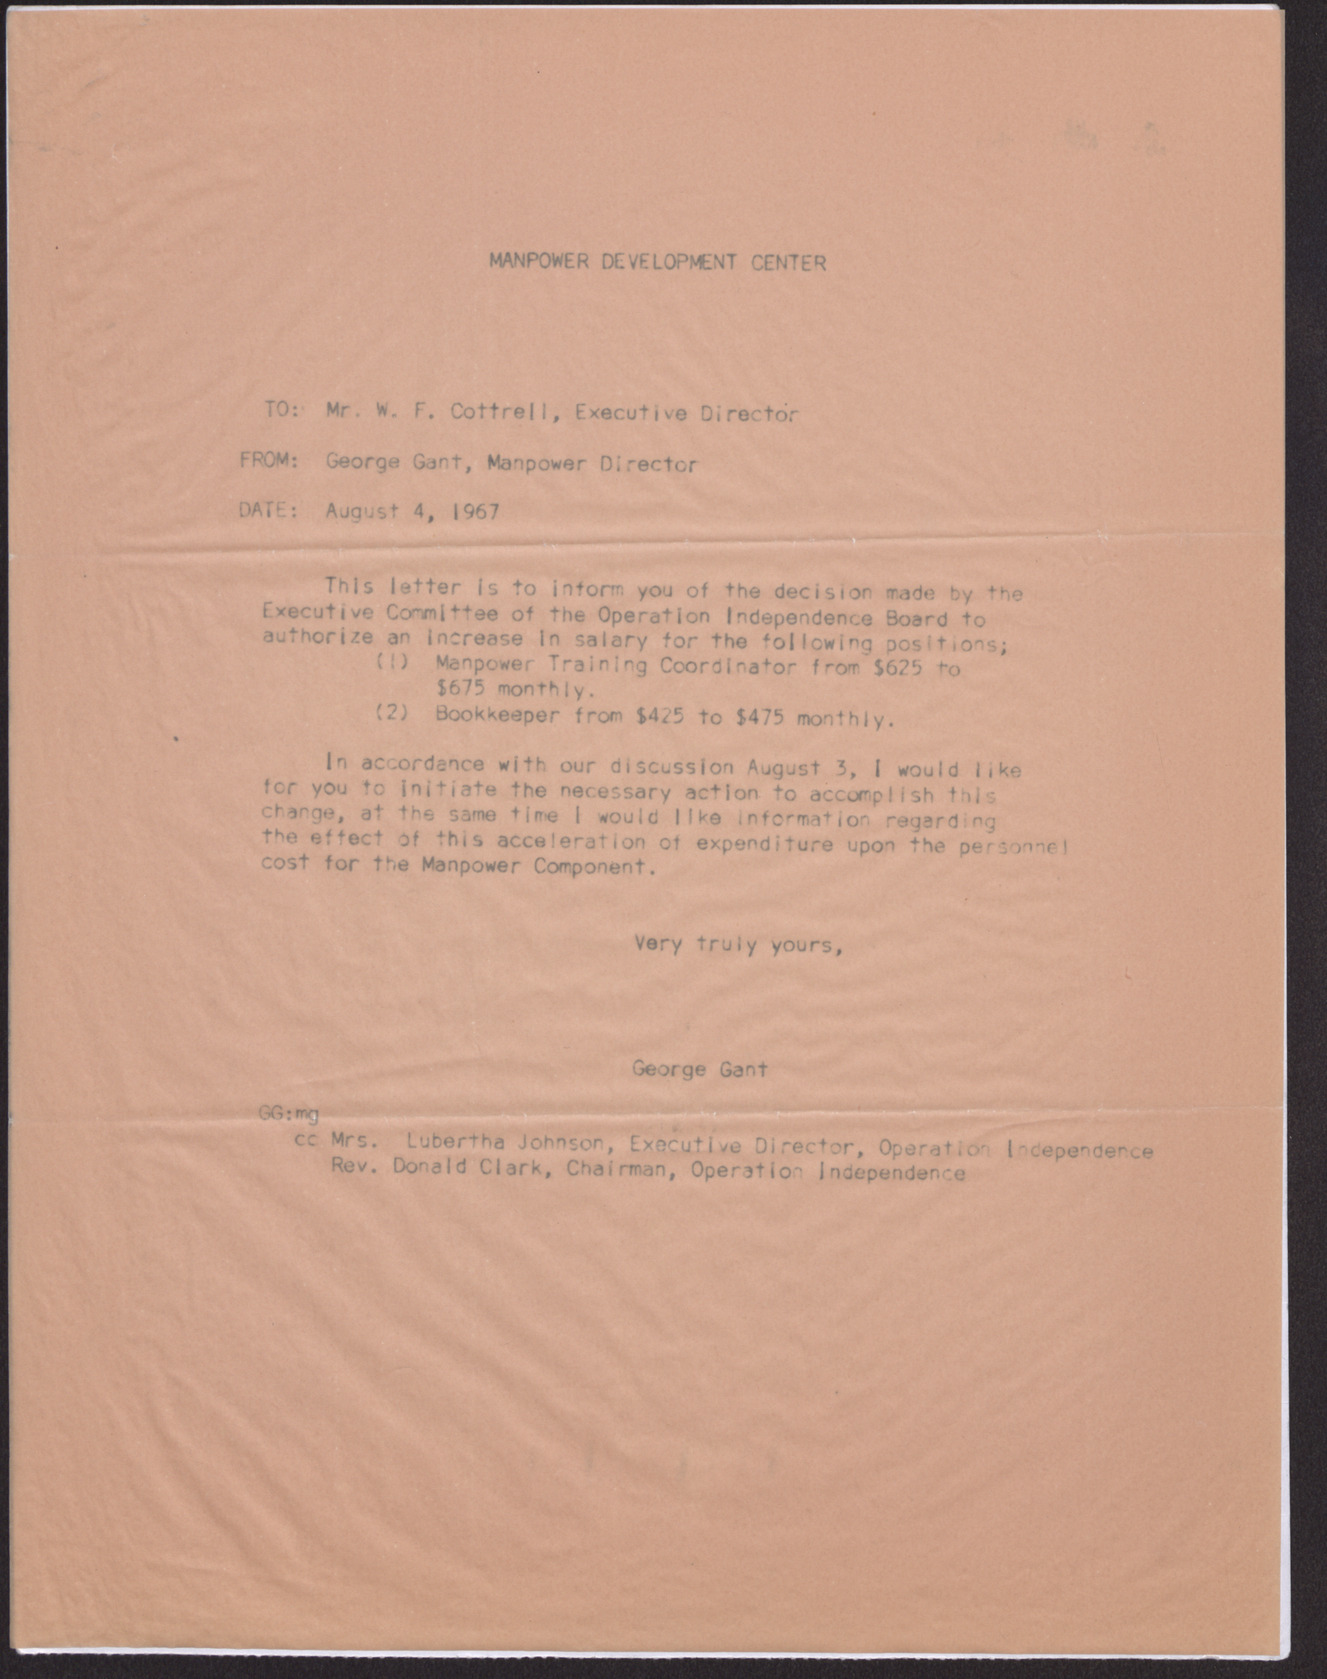 Letter to Mr. W. F. Cottrell from George Gant, August 4, 1967